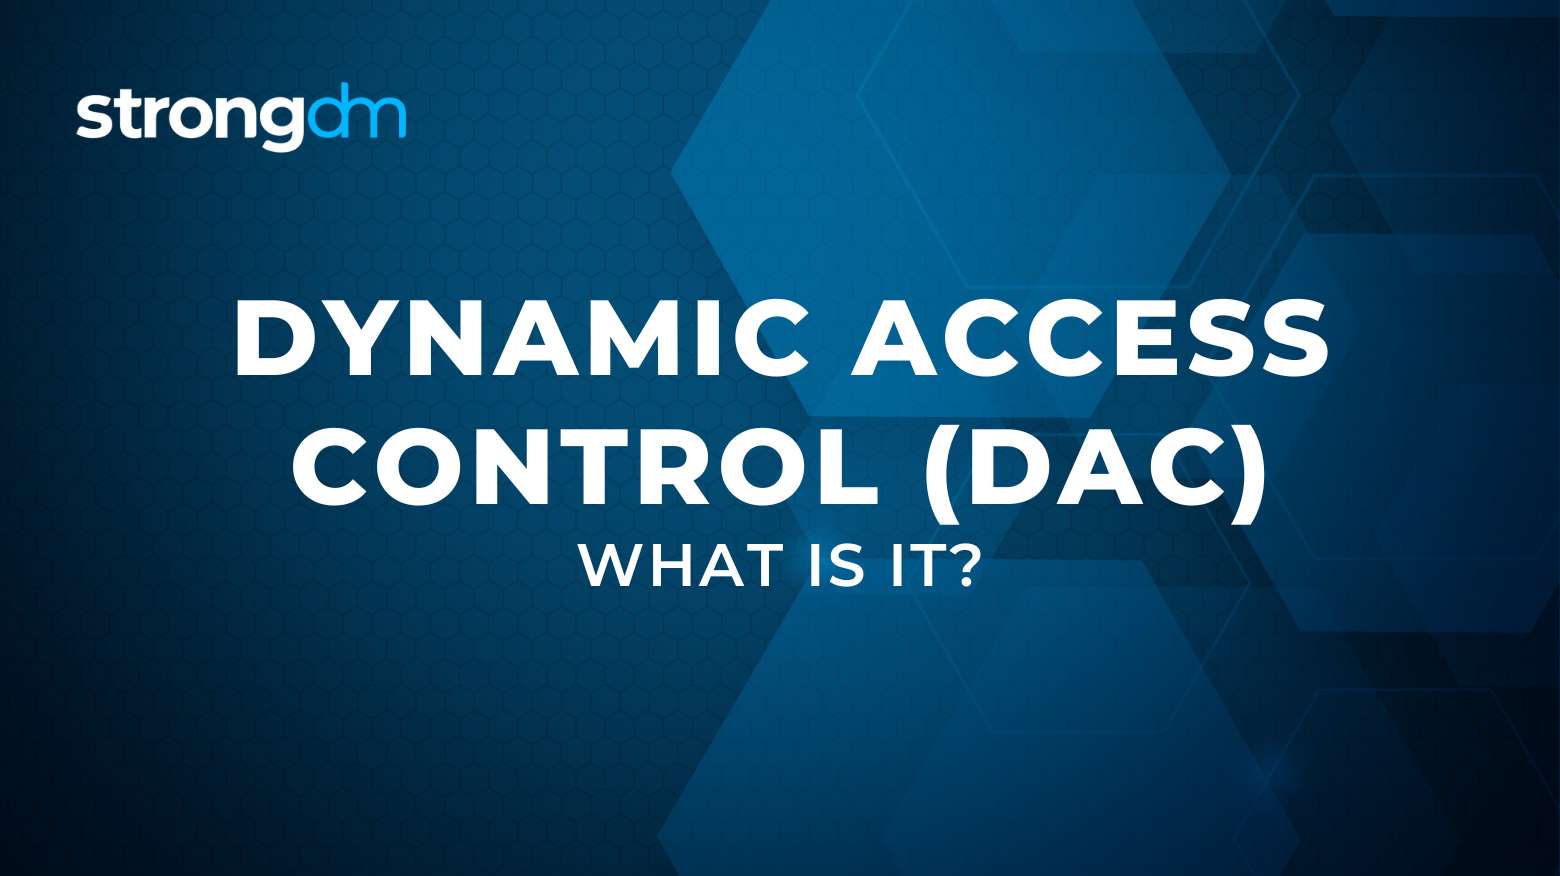 What is Dynamic Access Control (DAC)?